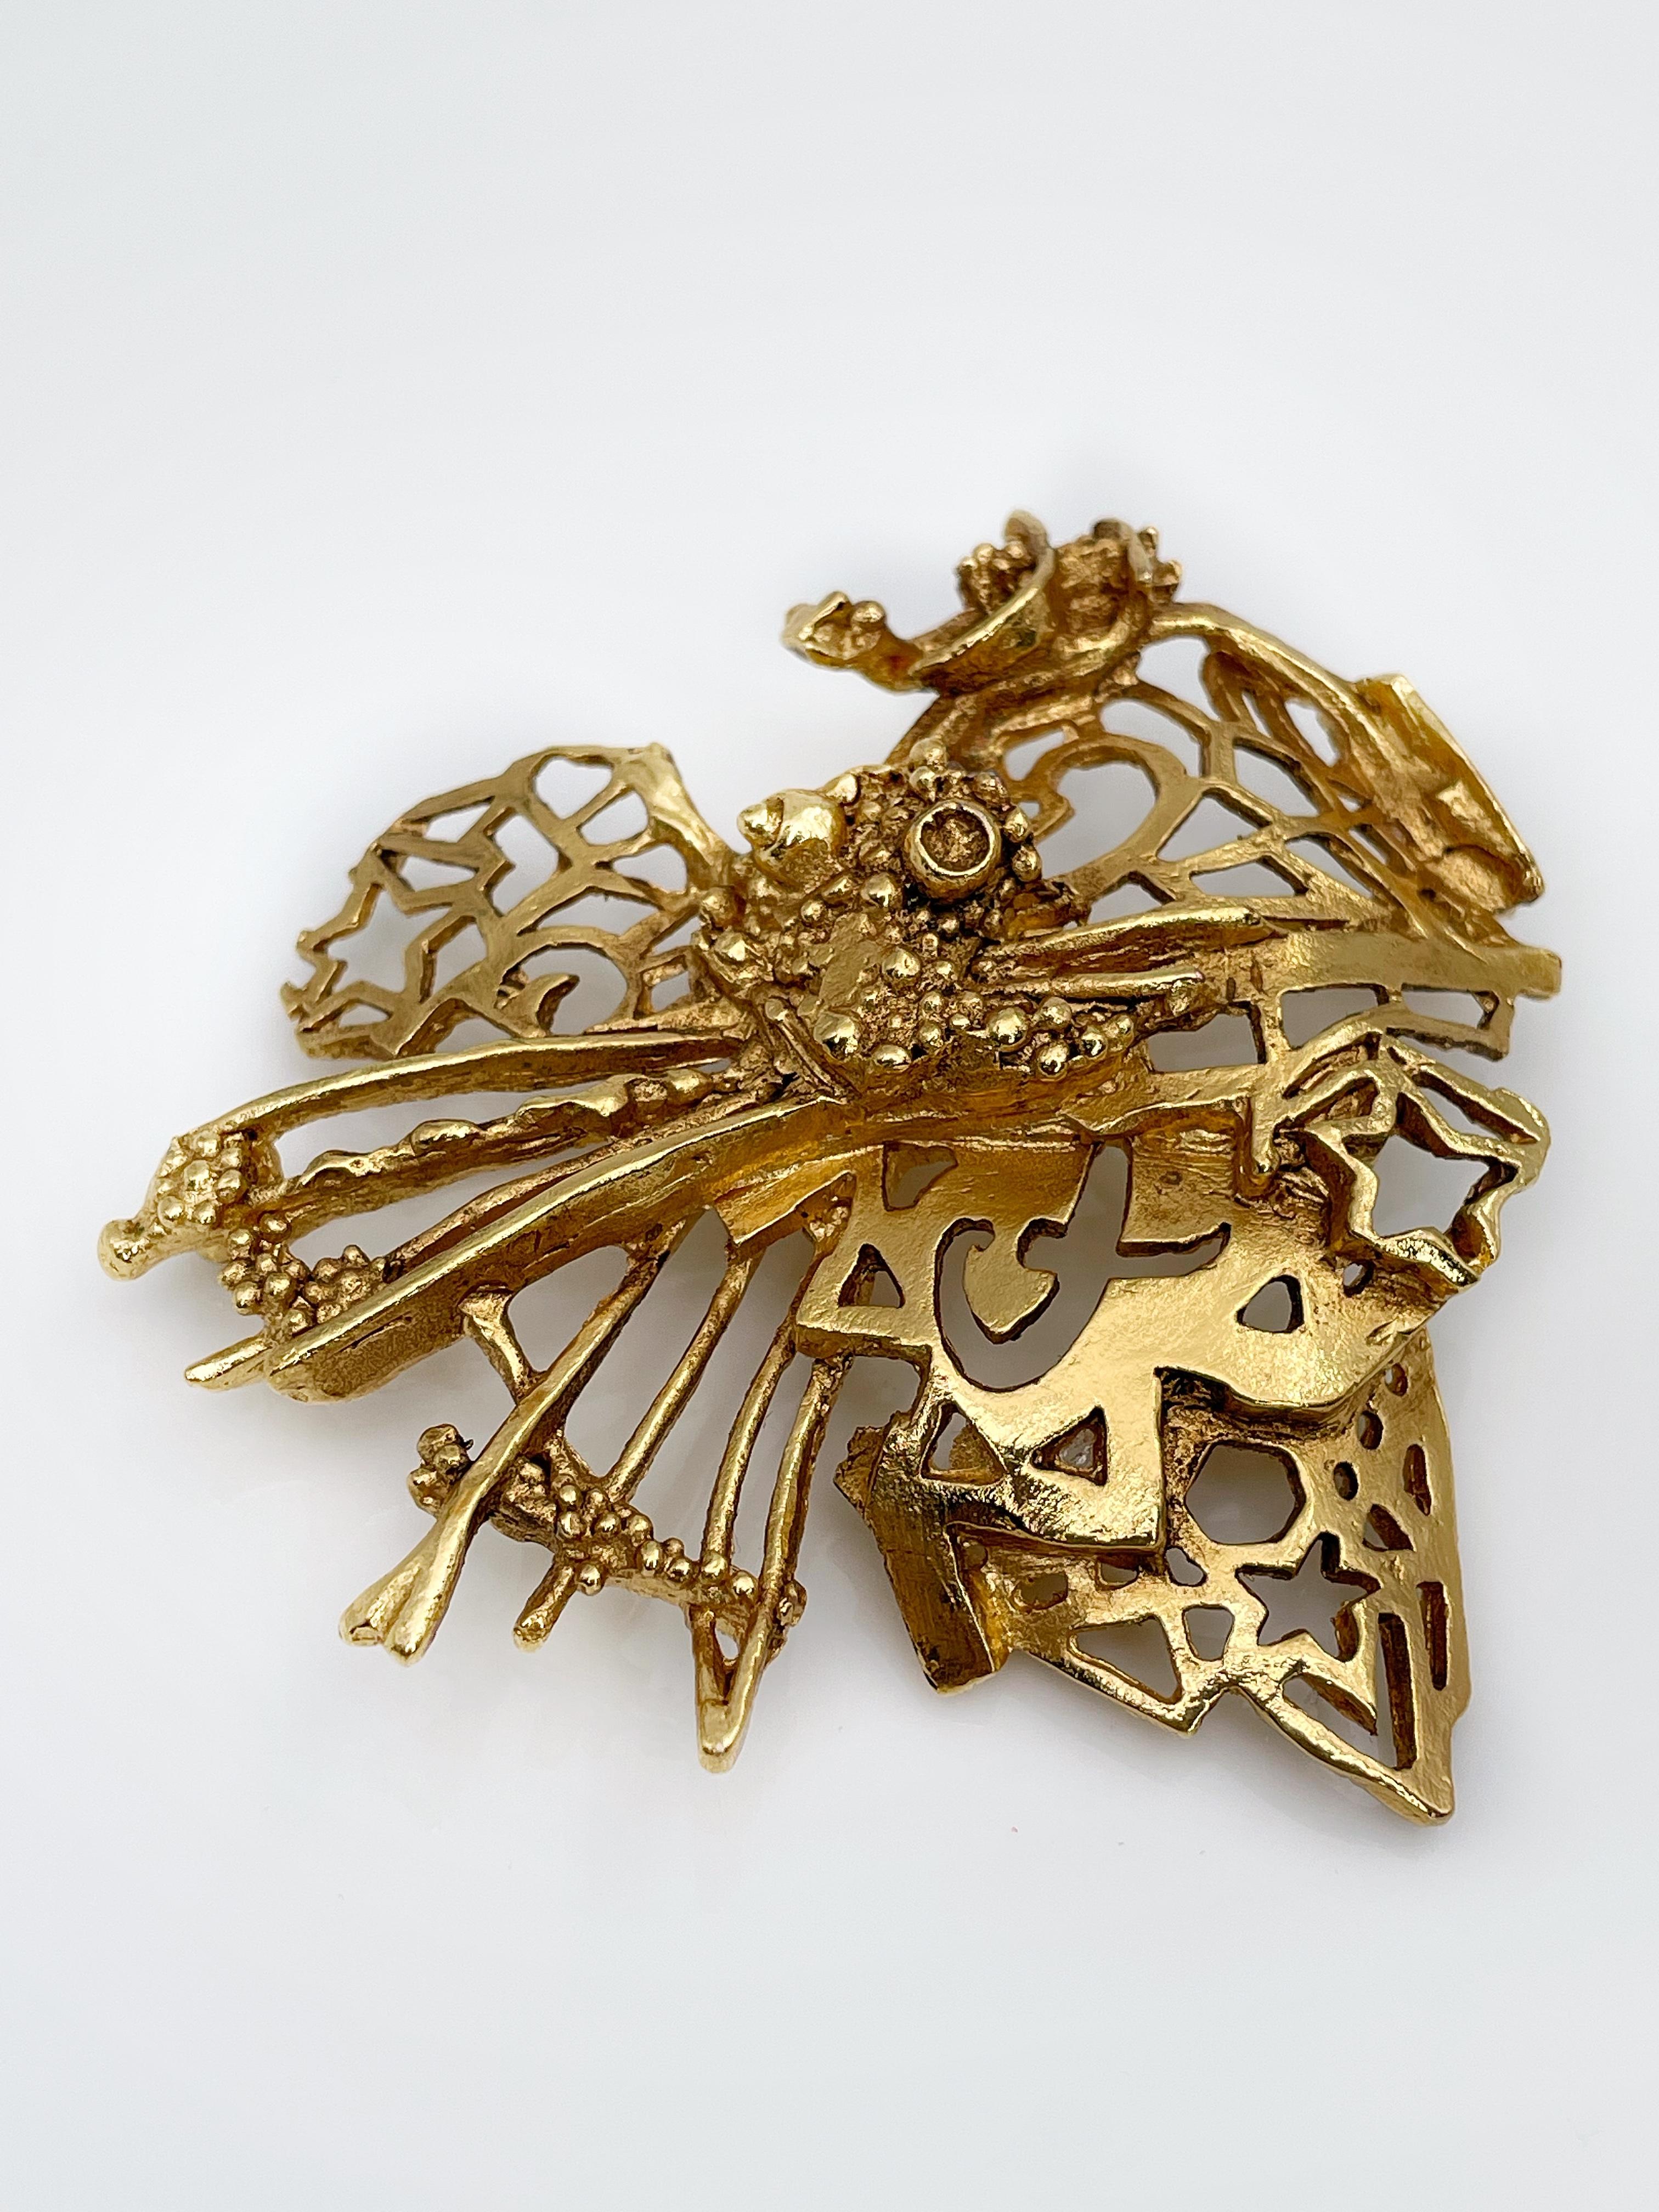 Vintage Christian Lacroix heart pendant brooch in gold plated metal. Costume jewellery from 1990’s.

Signed on reverse 